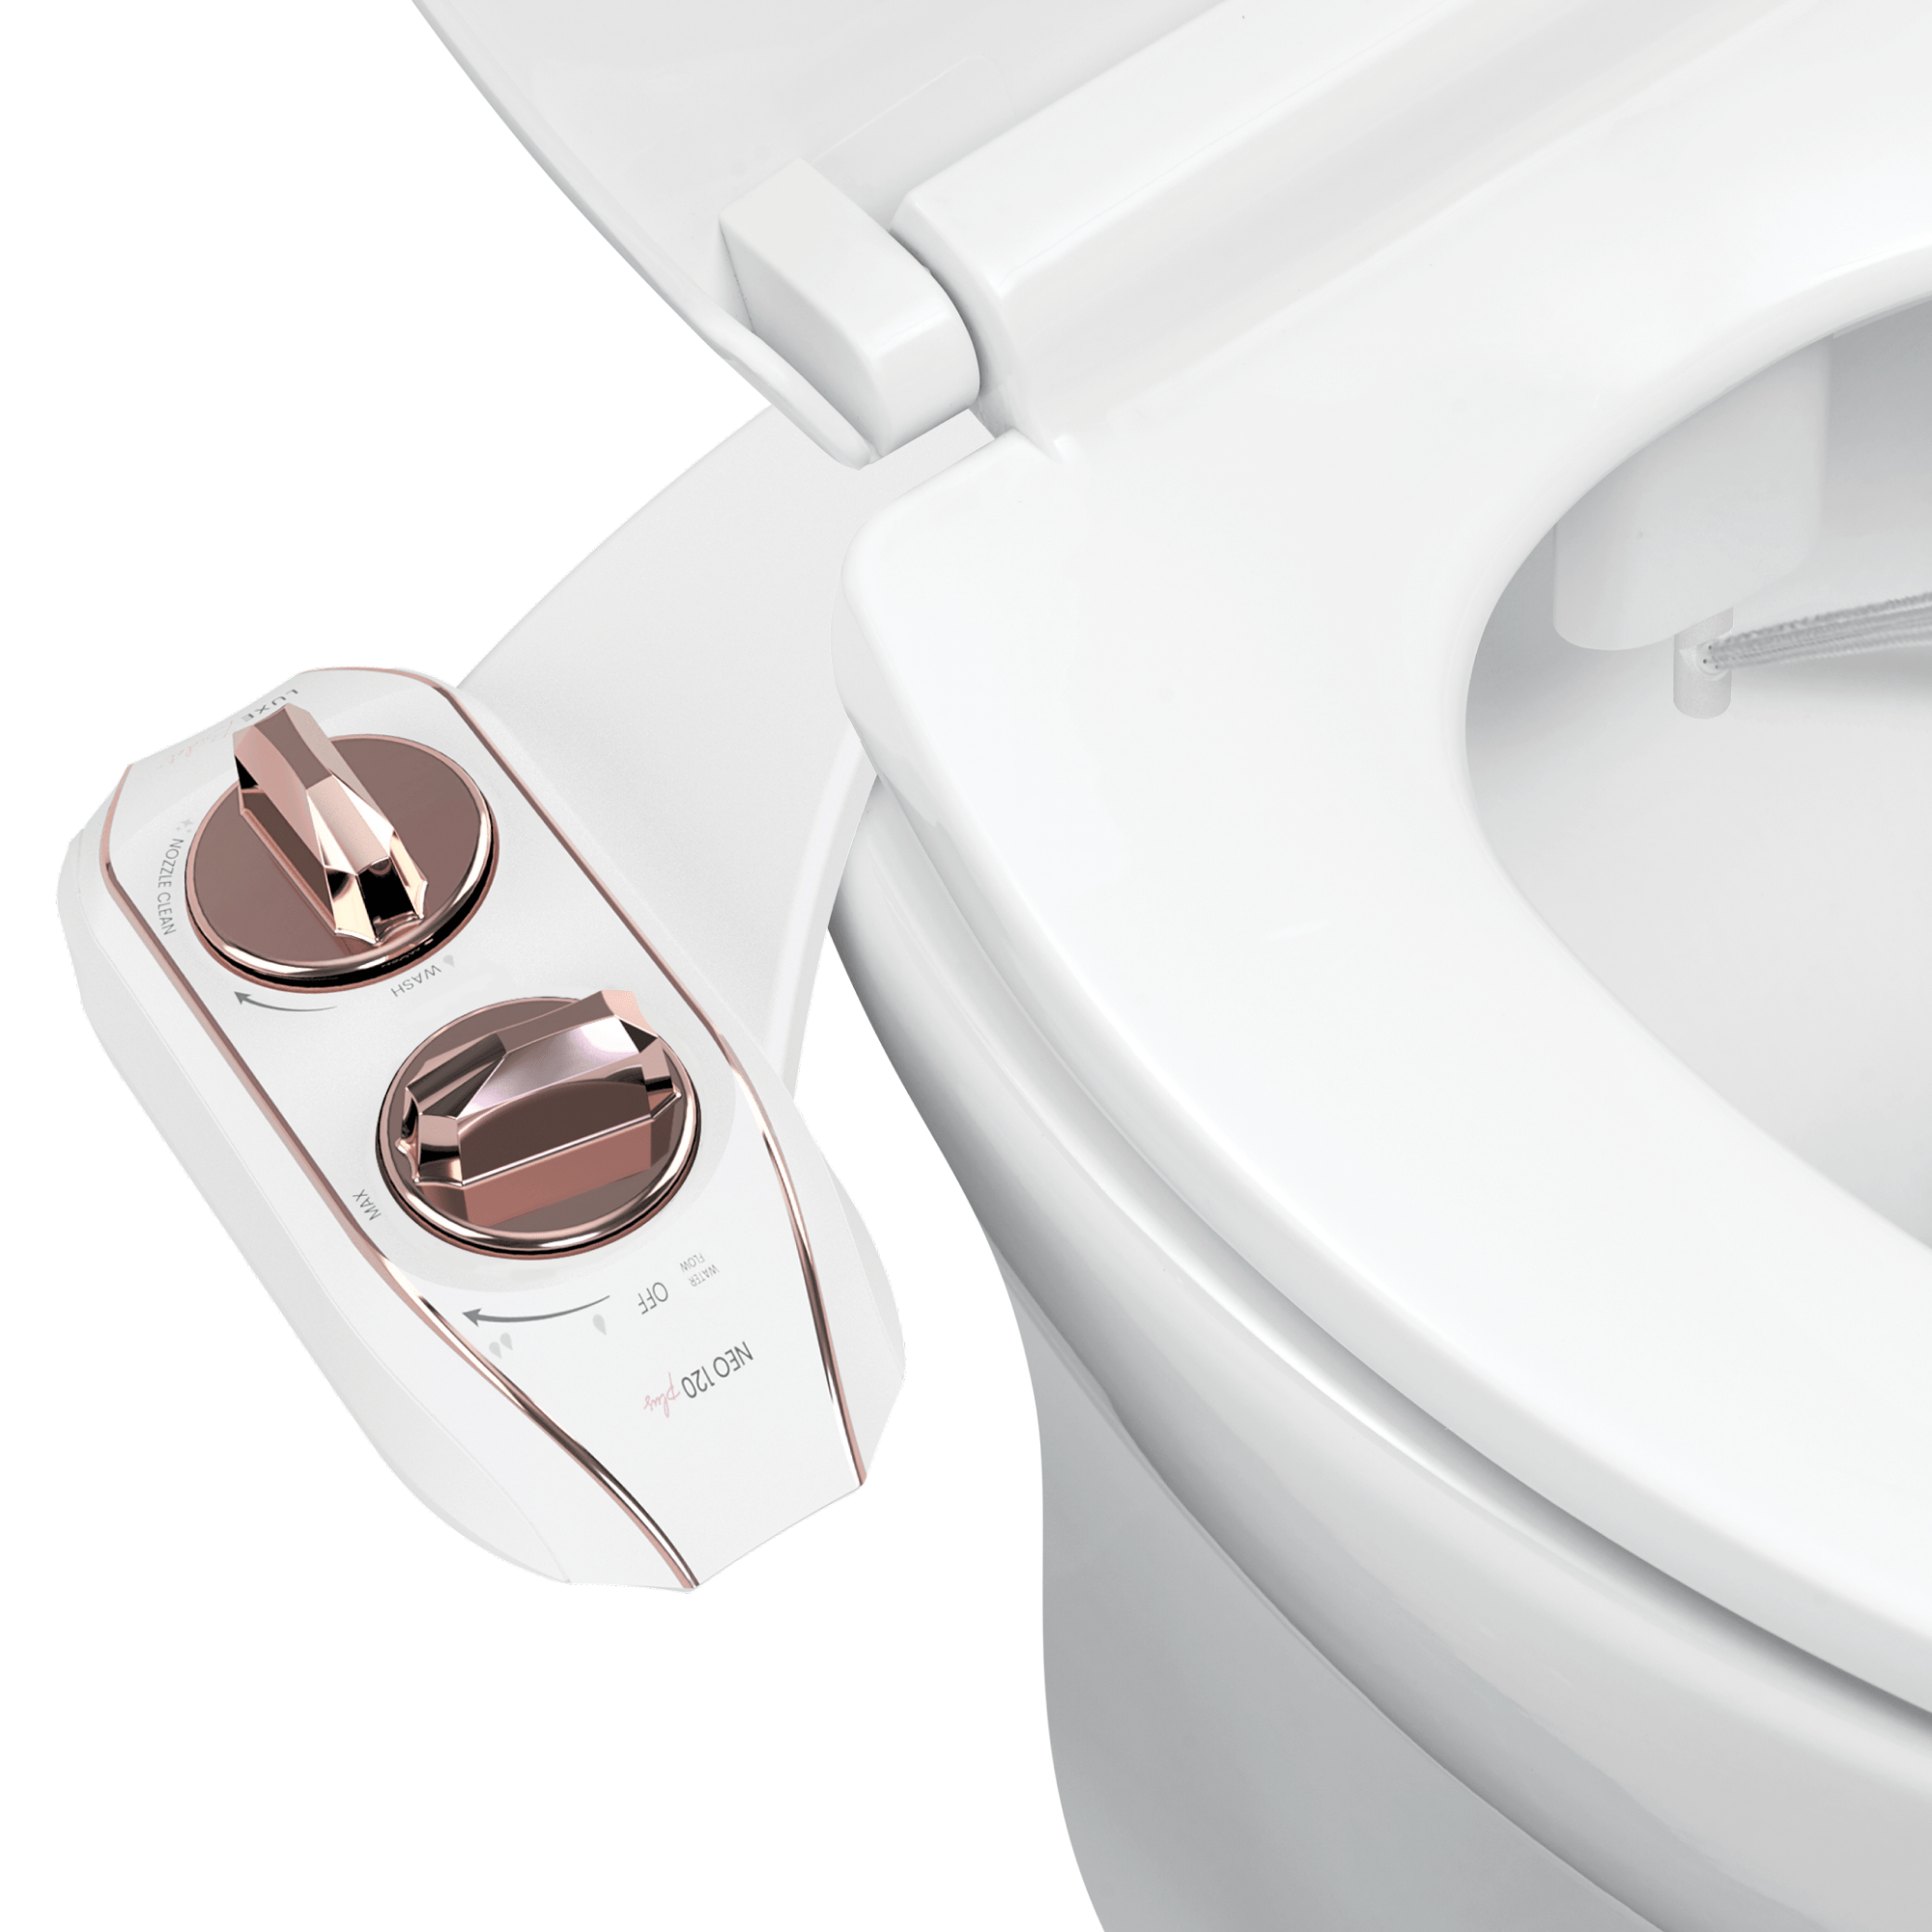 NEO 120 Plus: Imperfect Packaging - NEO 120 Plus Rose Gold installed on a toilet with water spraying from nozzles